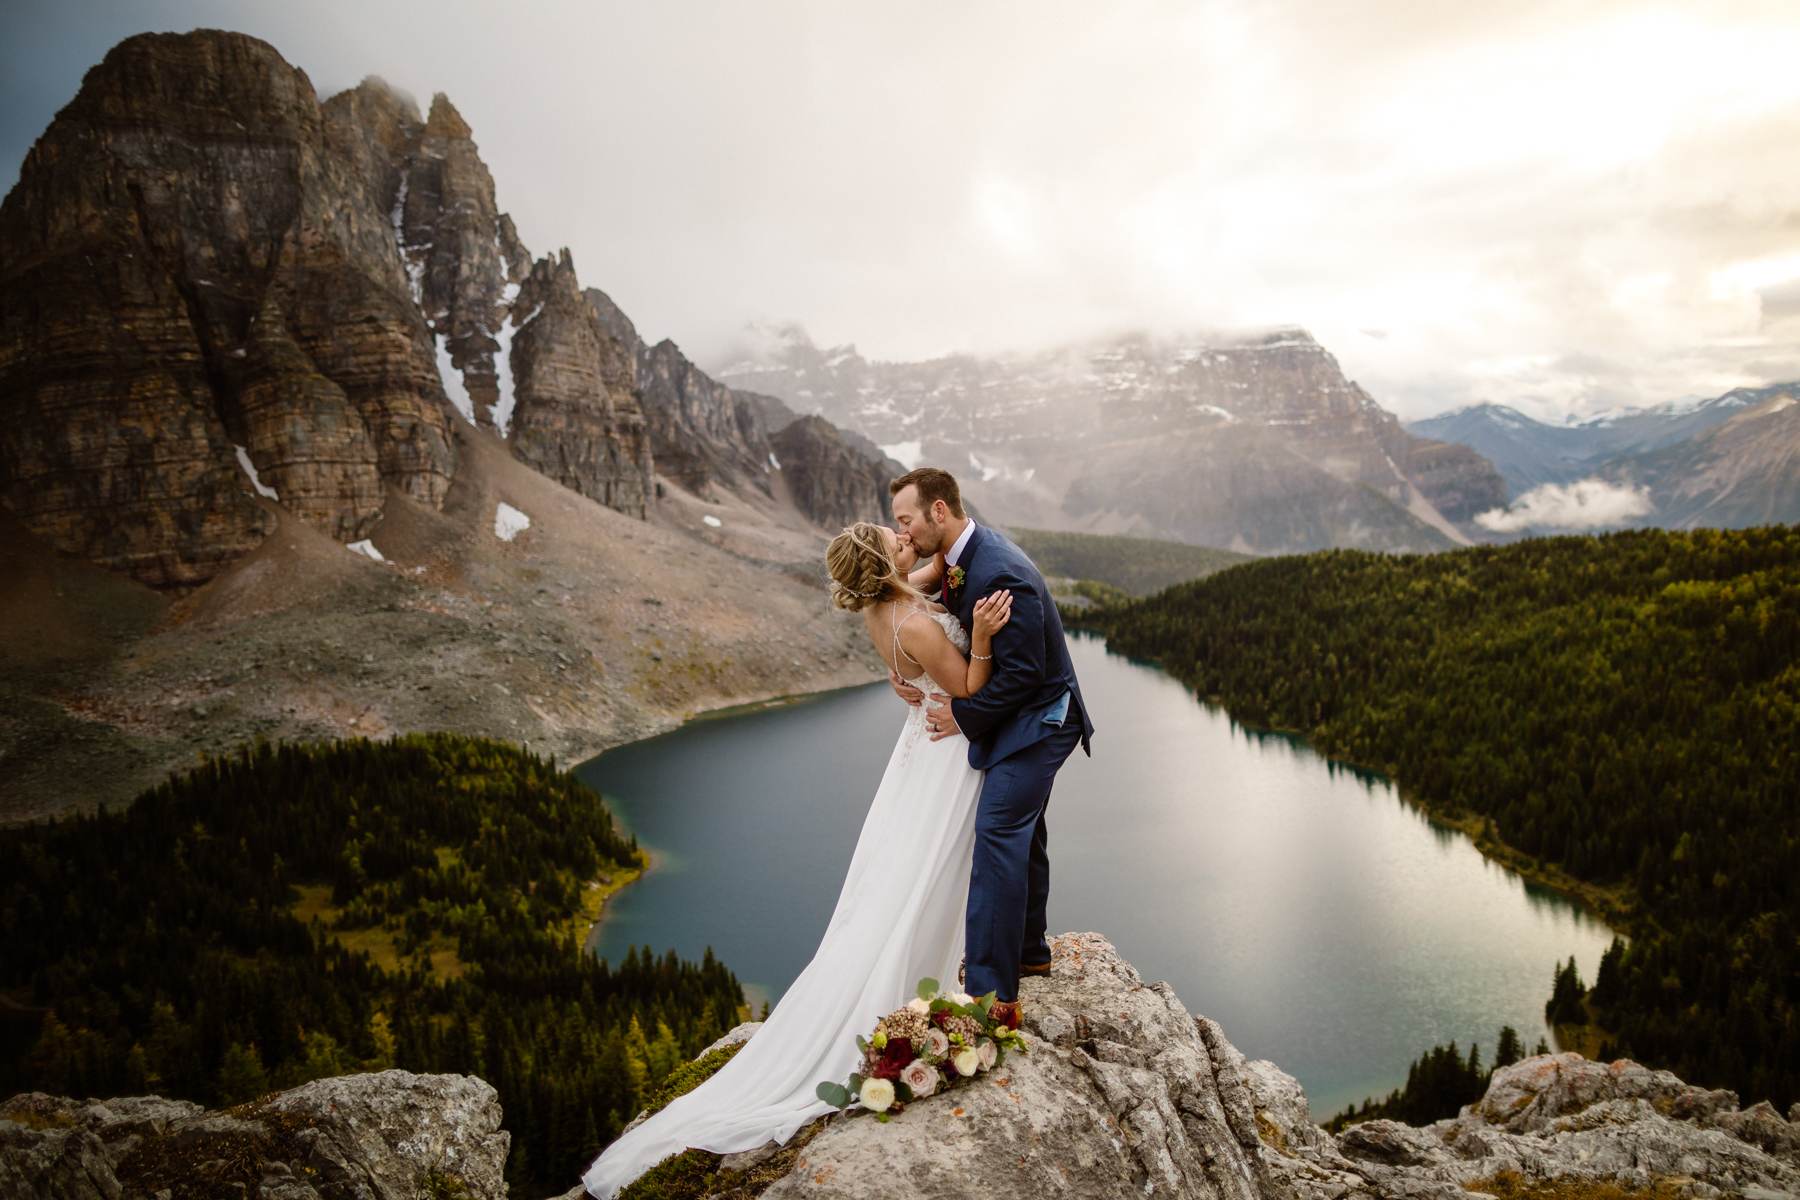 Mount Assiniboine Elopement Photographers at a Backcountry Lodge - Photo 35